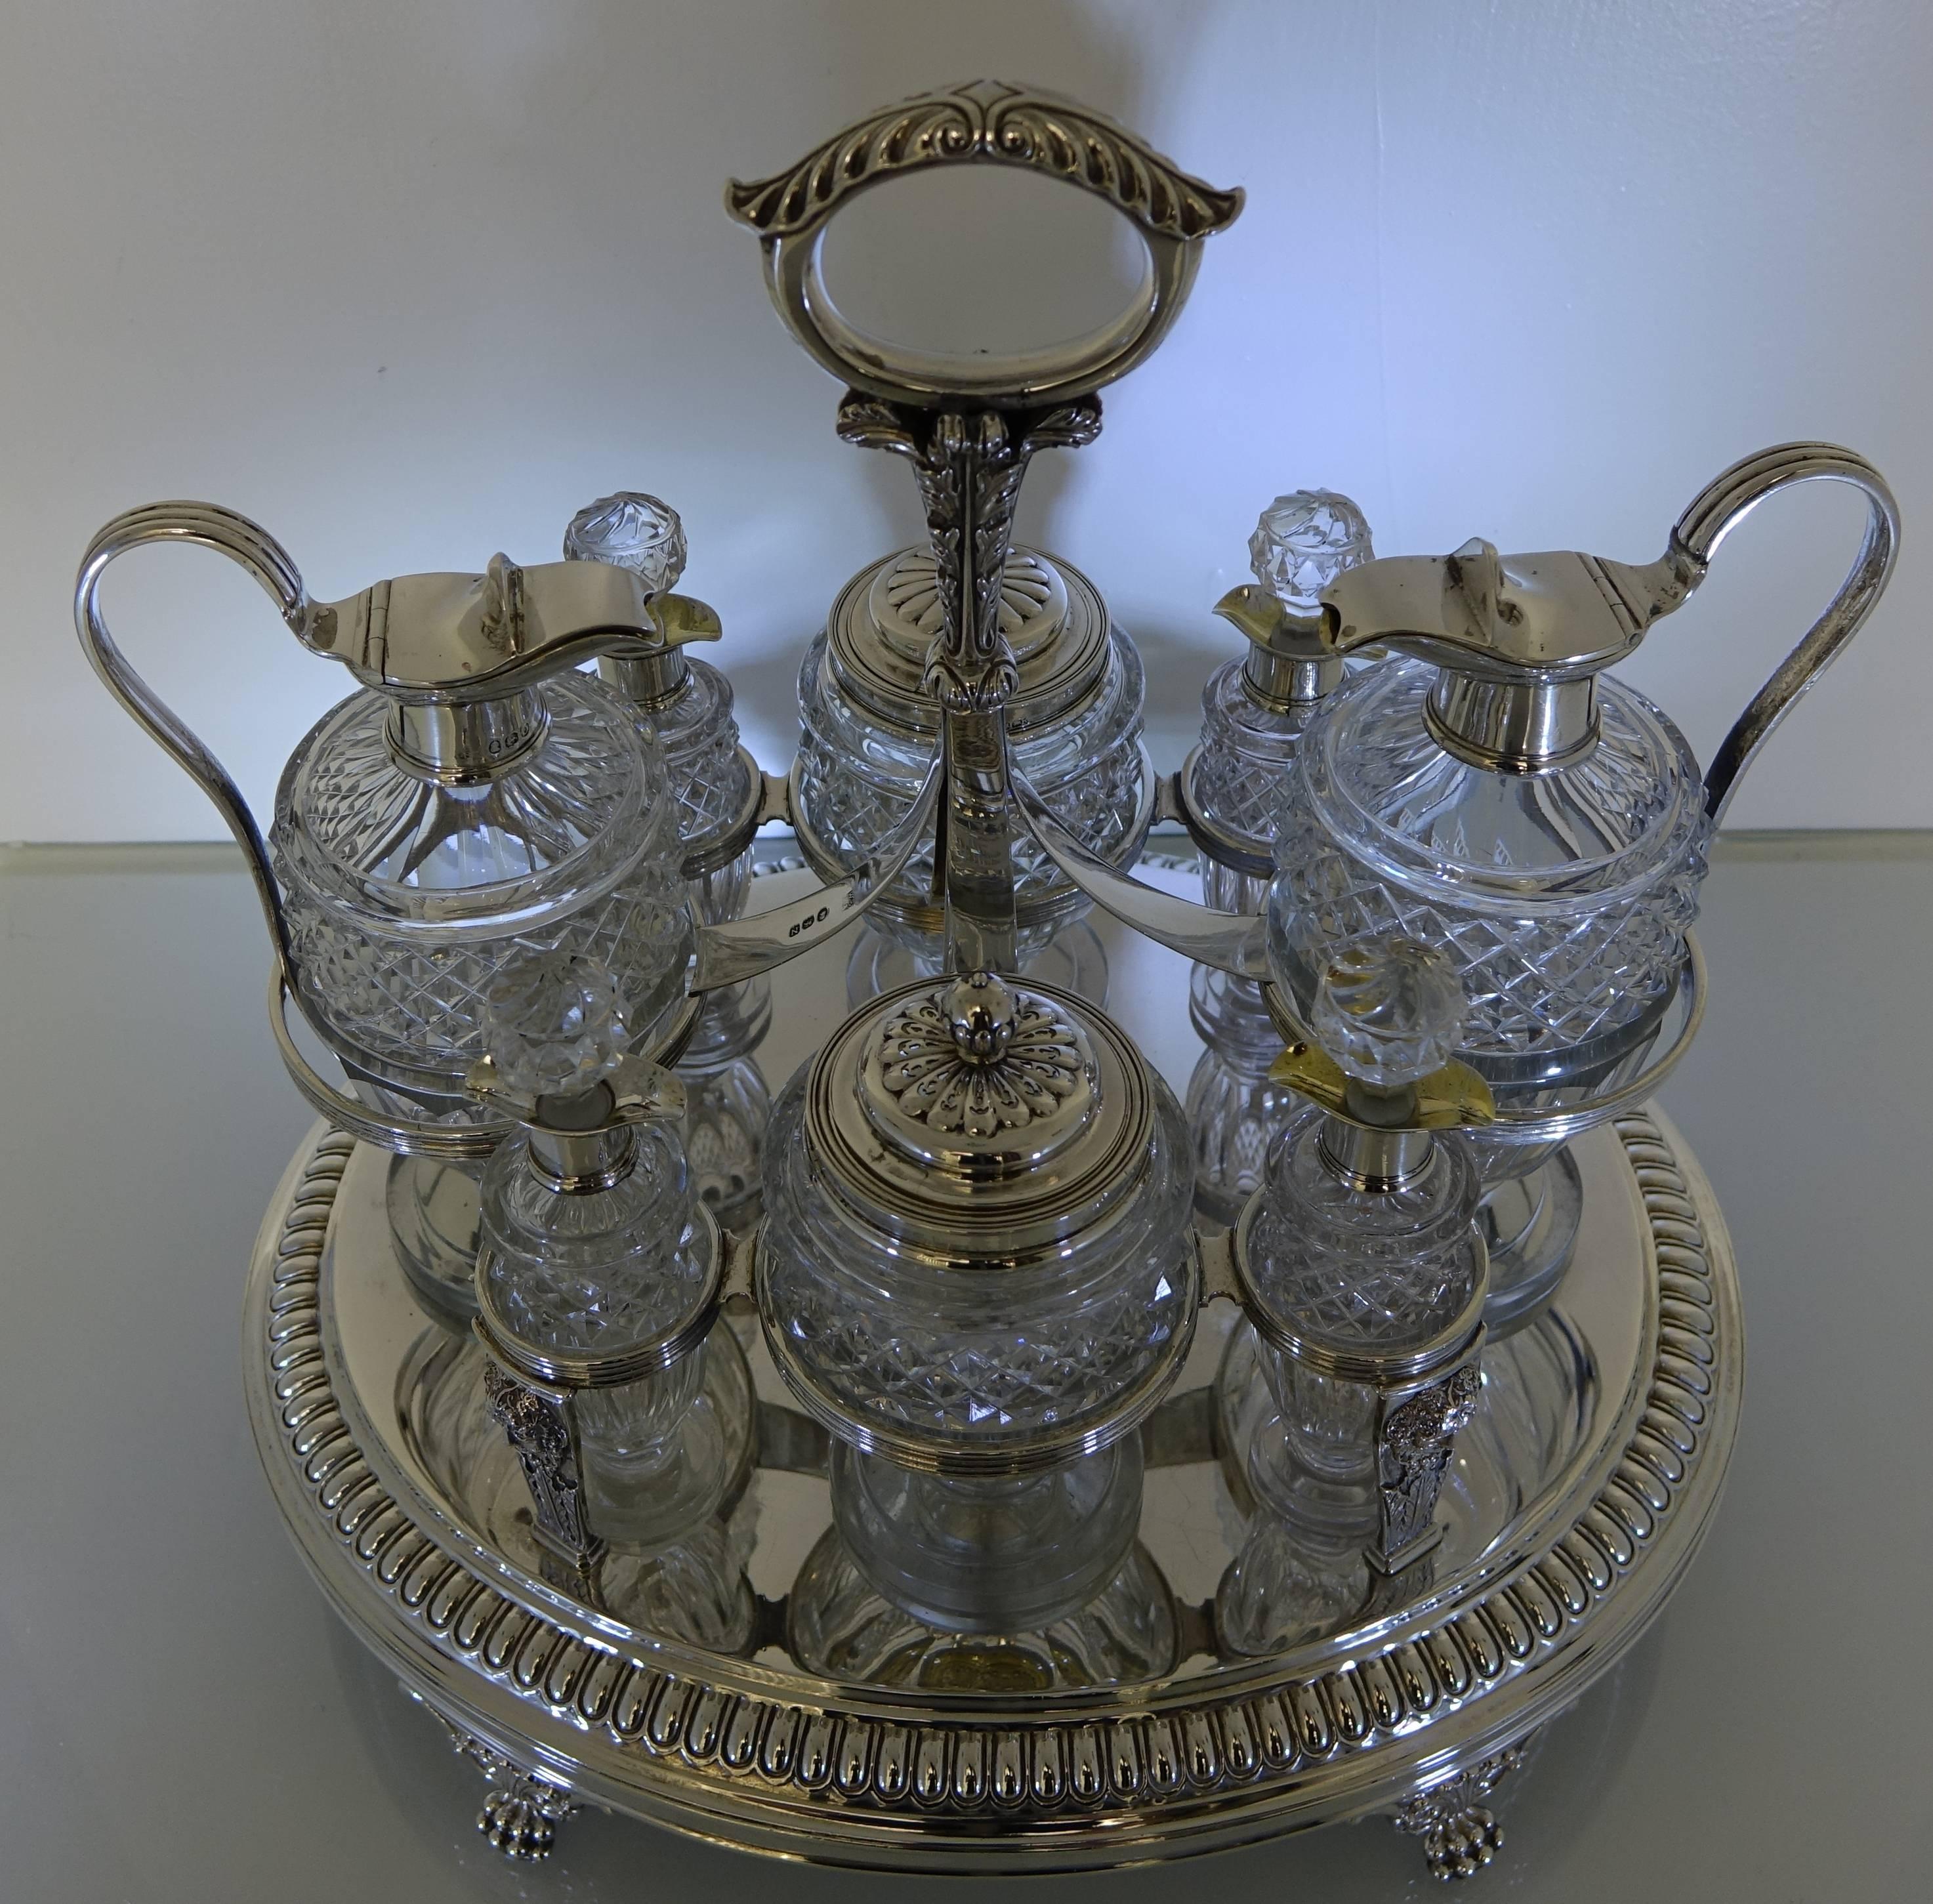 A very large and important looking silver eight bottle oval Georgian cruet. The cruet is very grand in size with a tongue border, cherubs and reeded decoration. The cruet has decorative claw feet and acanthus leaf handle. The glass bottles are hand